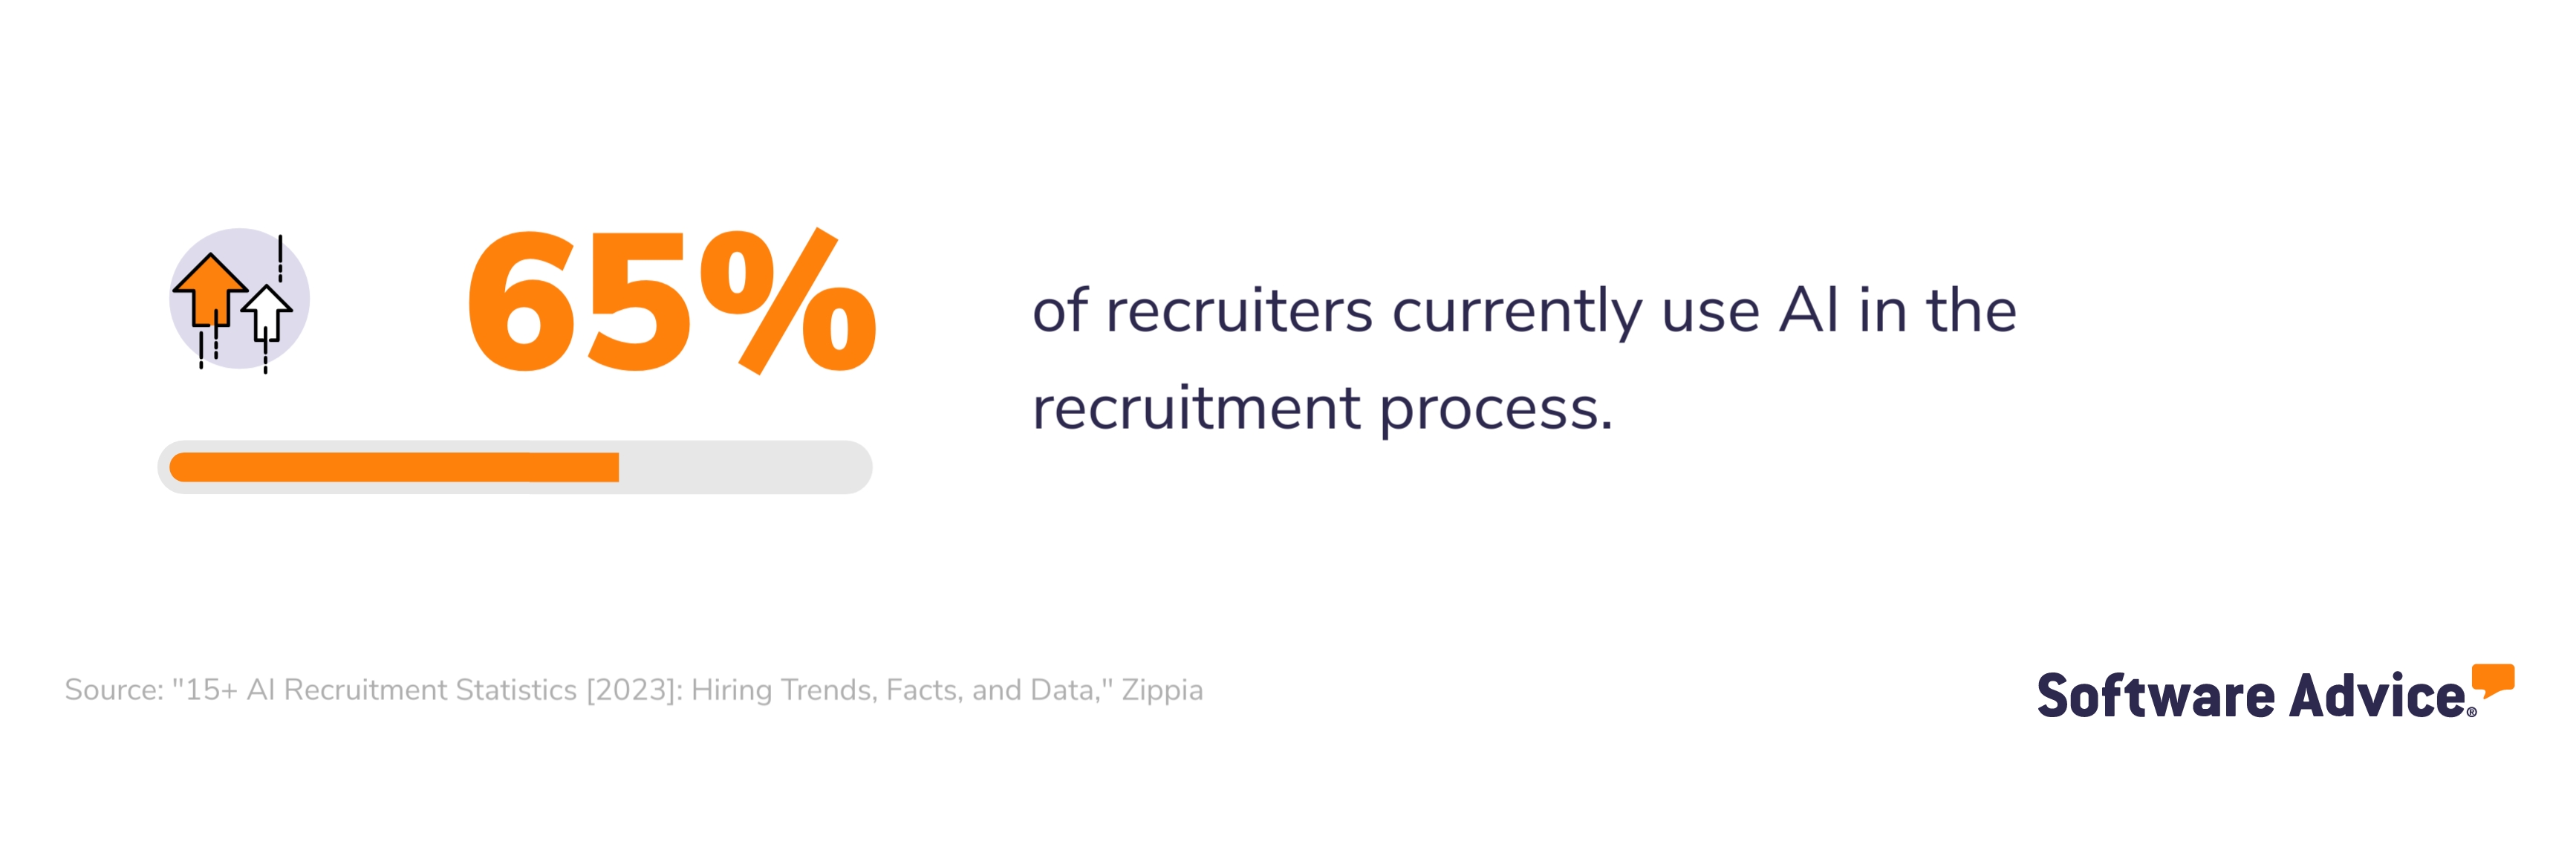 65% of recruiters currently use AI in the recruitment process.